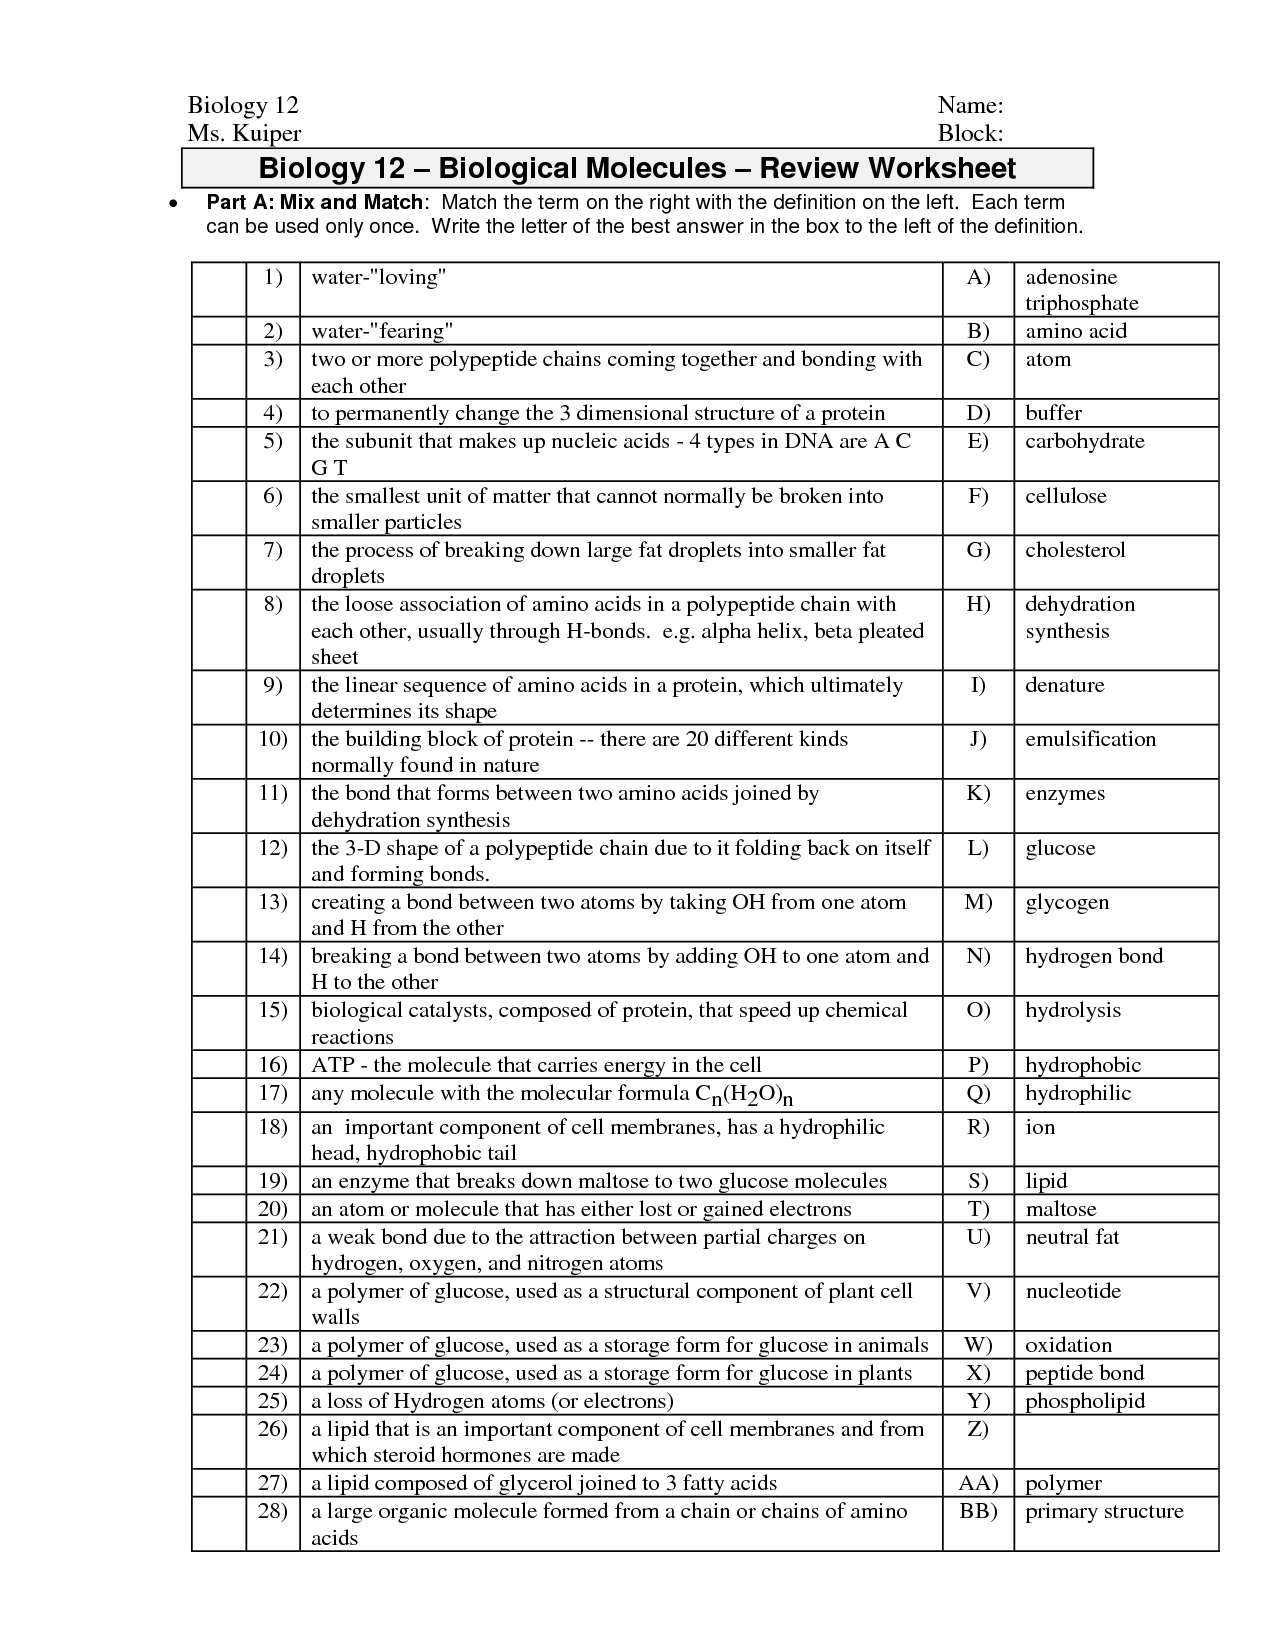 14-best-images-of-biological-molecules-worksheet-answers-organic-molecules-worksheet-review